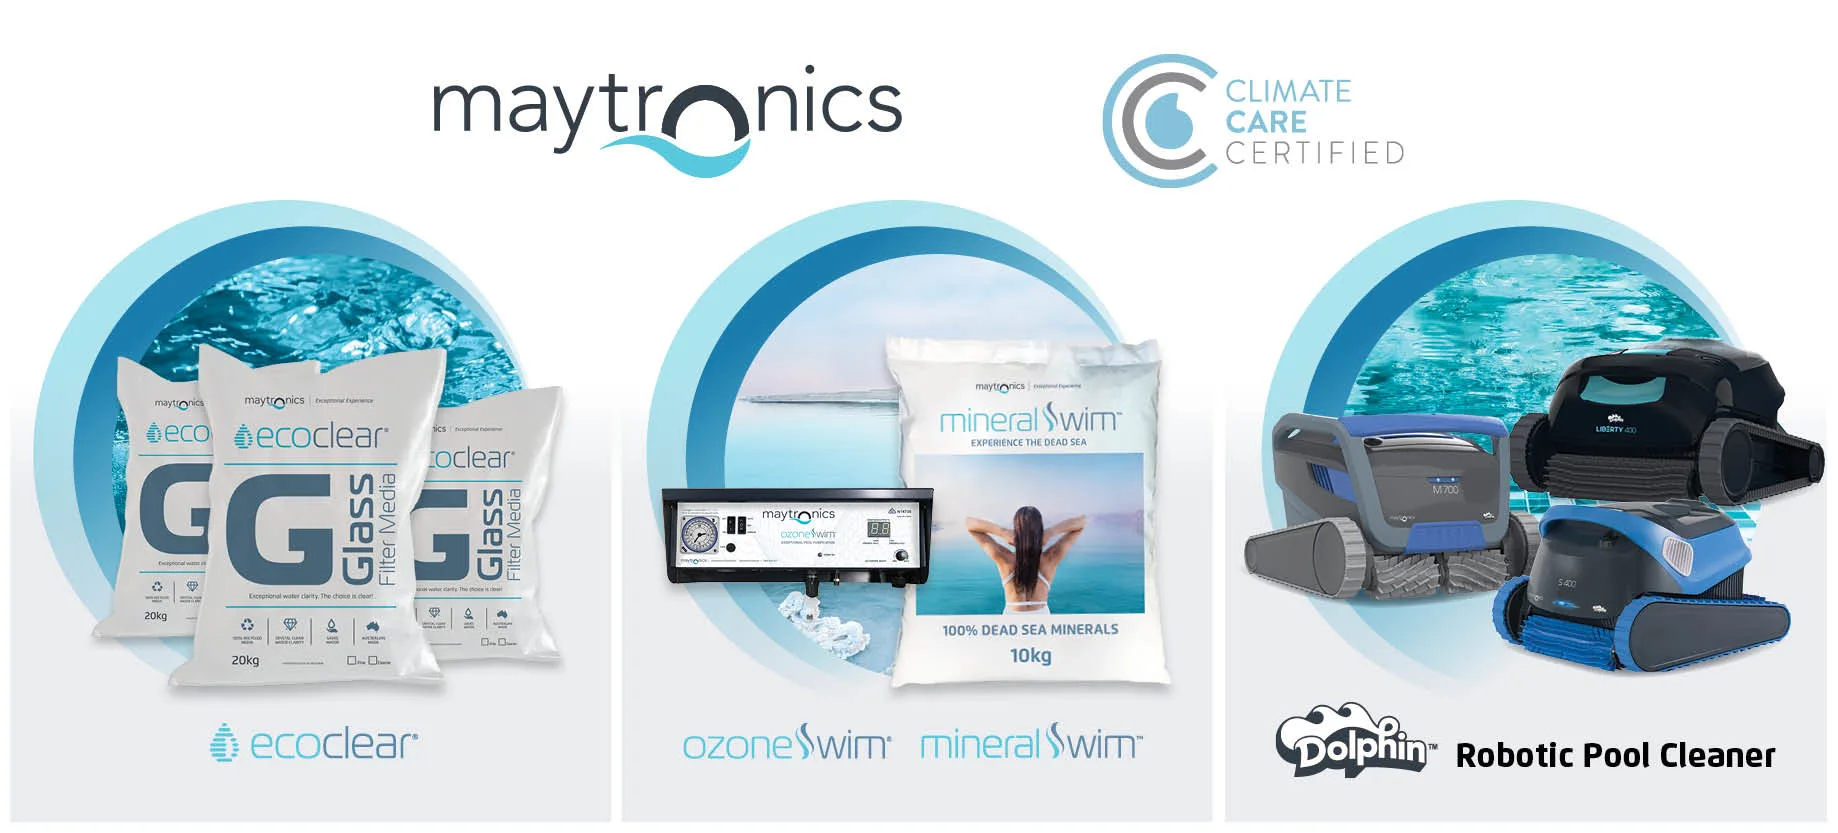 The Advantages of Climate Care Certified Maytronics Products